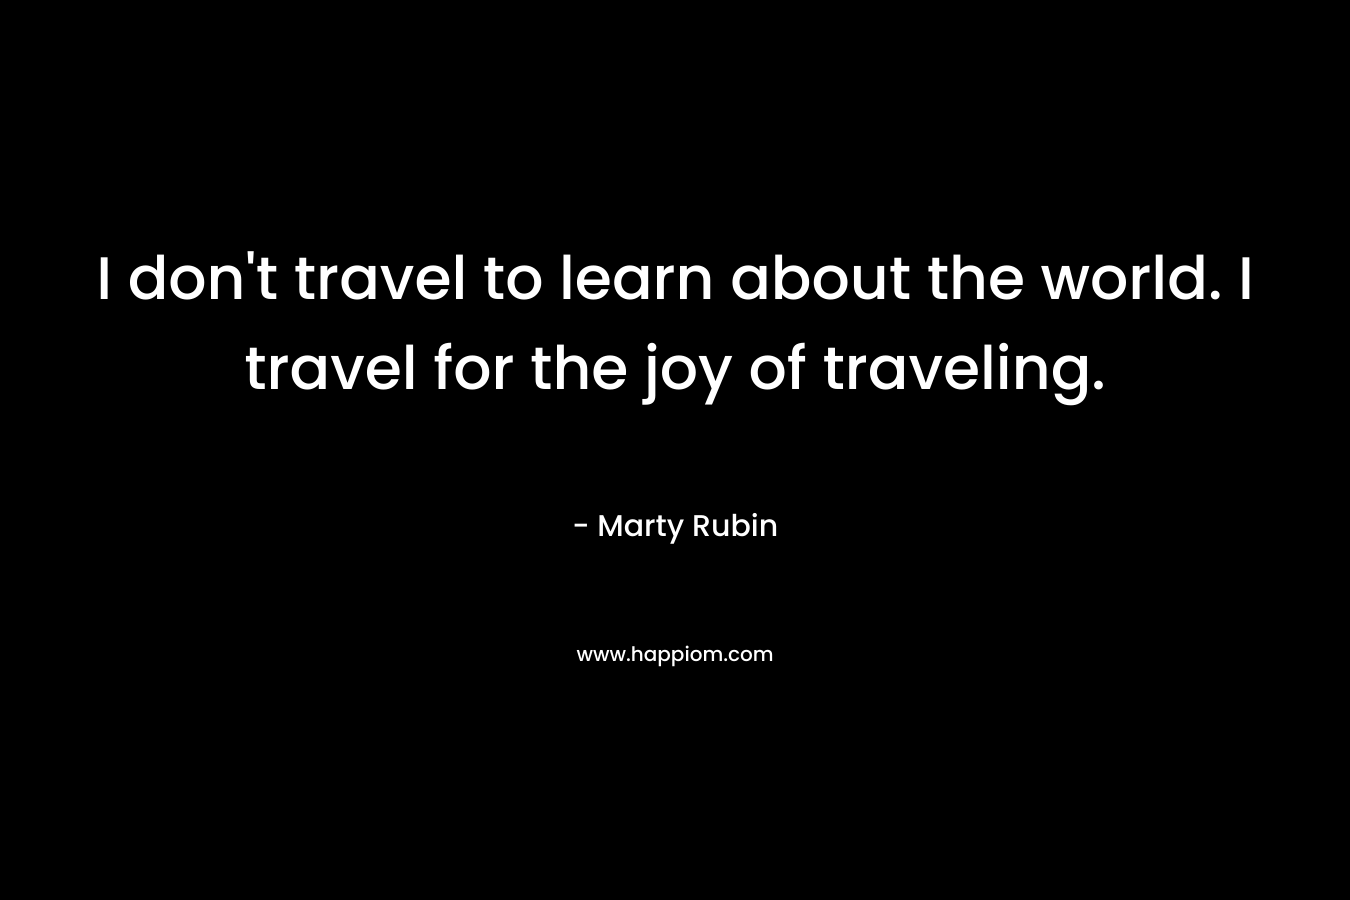 I don't travel to learn about the world. I travel for the joy of traveling.